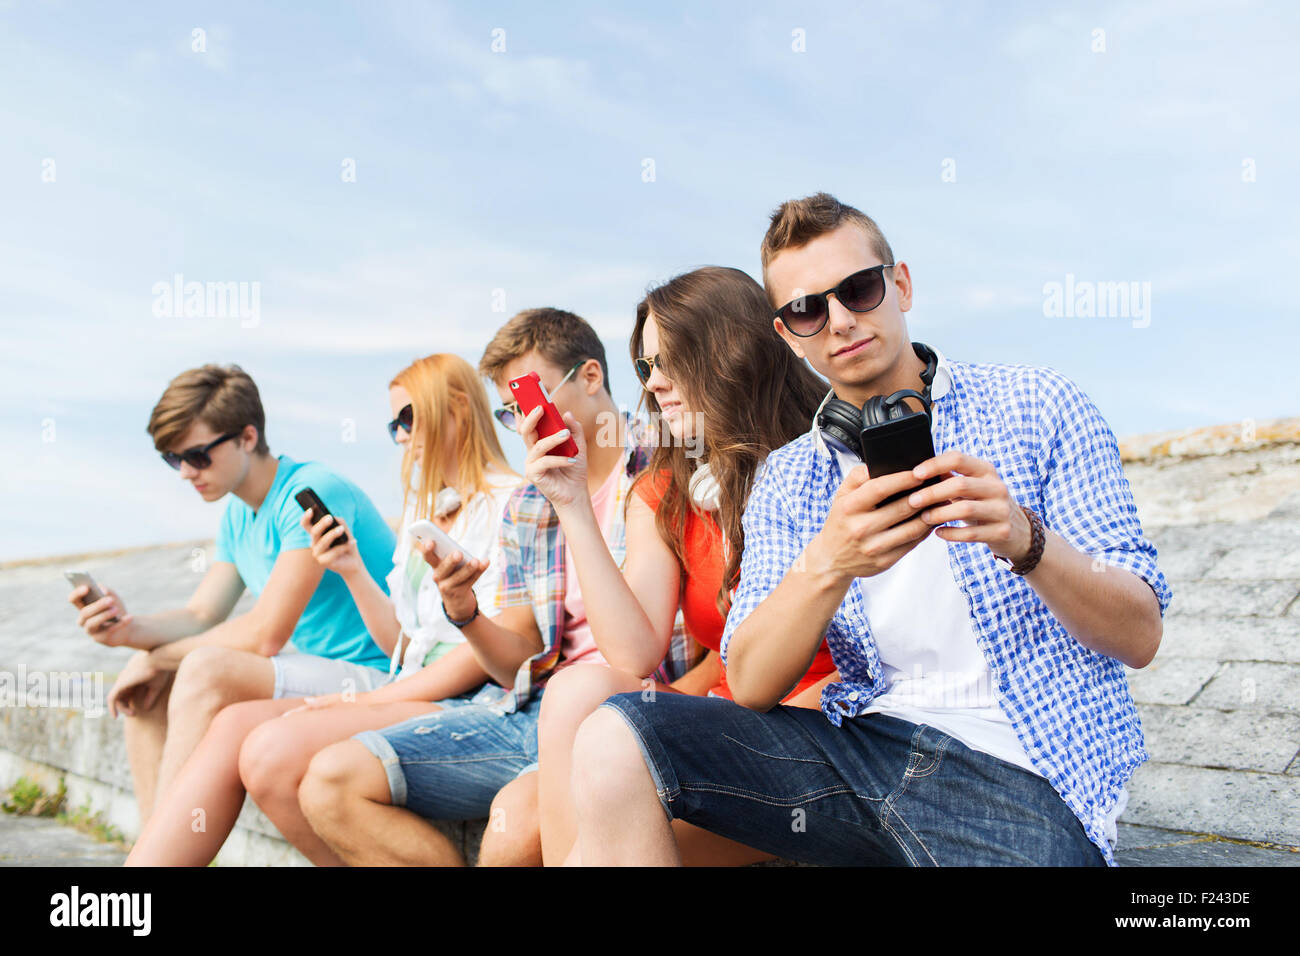 group of friends with smartphone outdoors Stock Photo